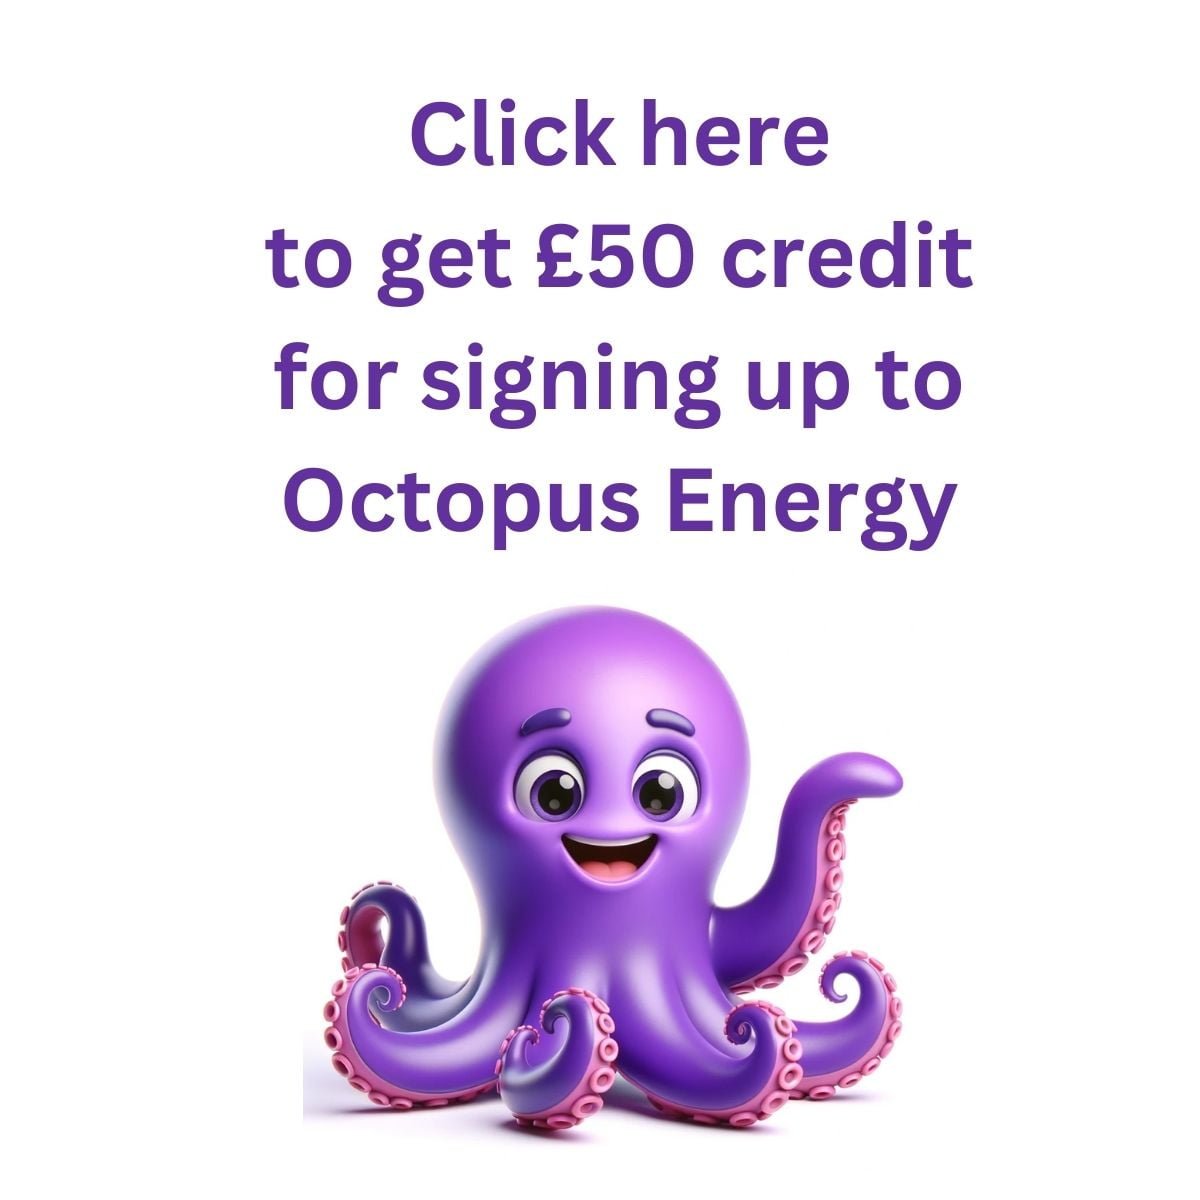 Get £50 for joining Octopus Energy by clicking here